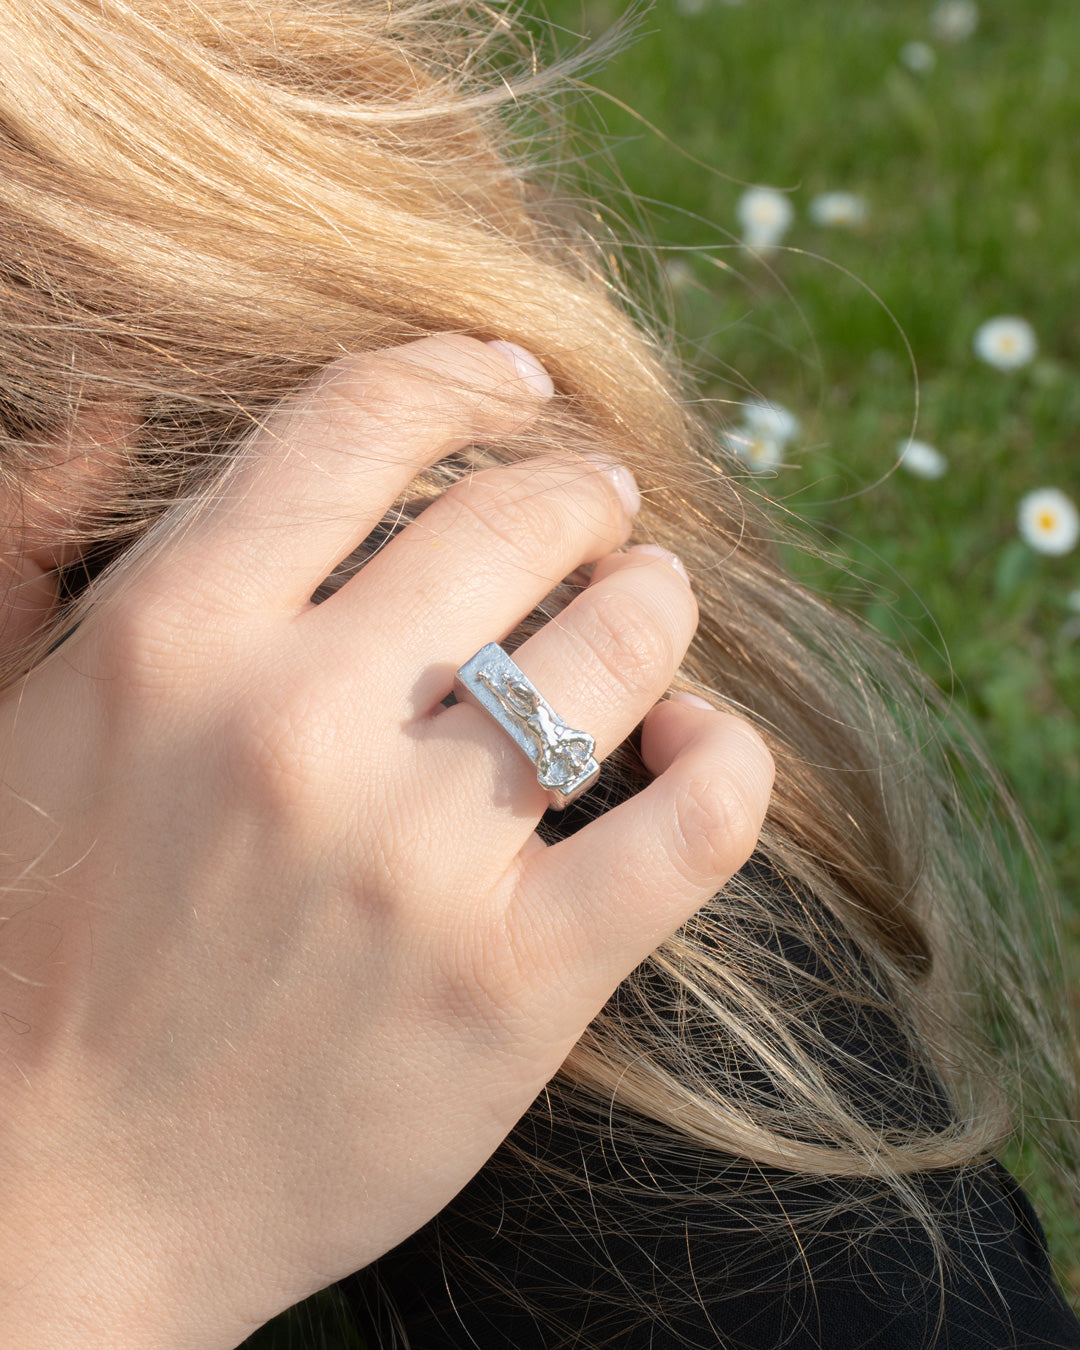 "I'd love to watch the clouds with you" Ring